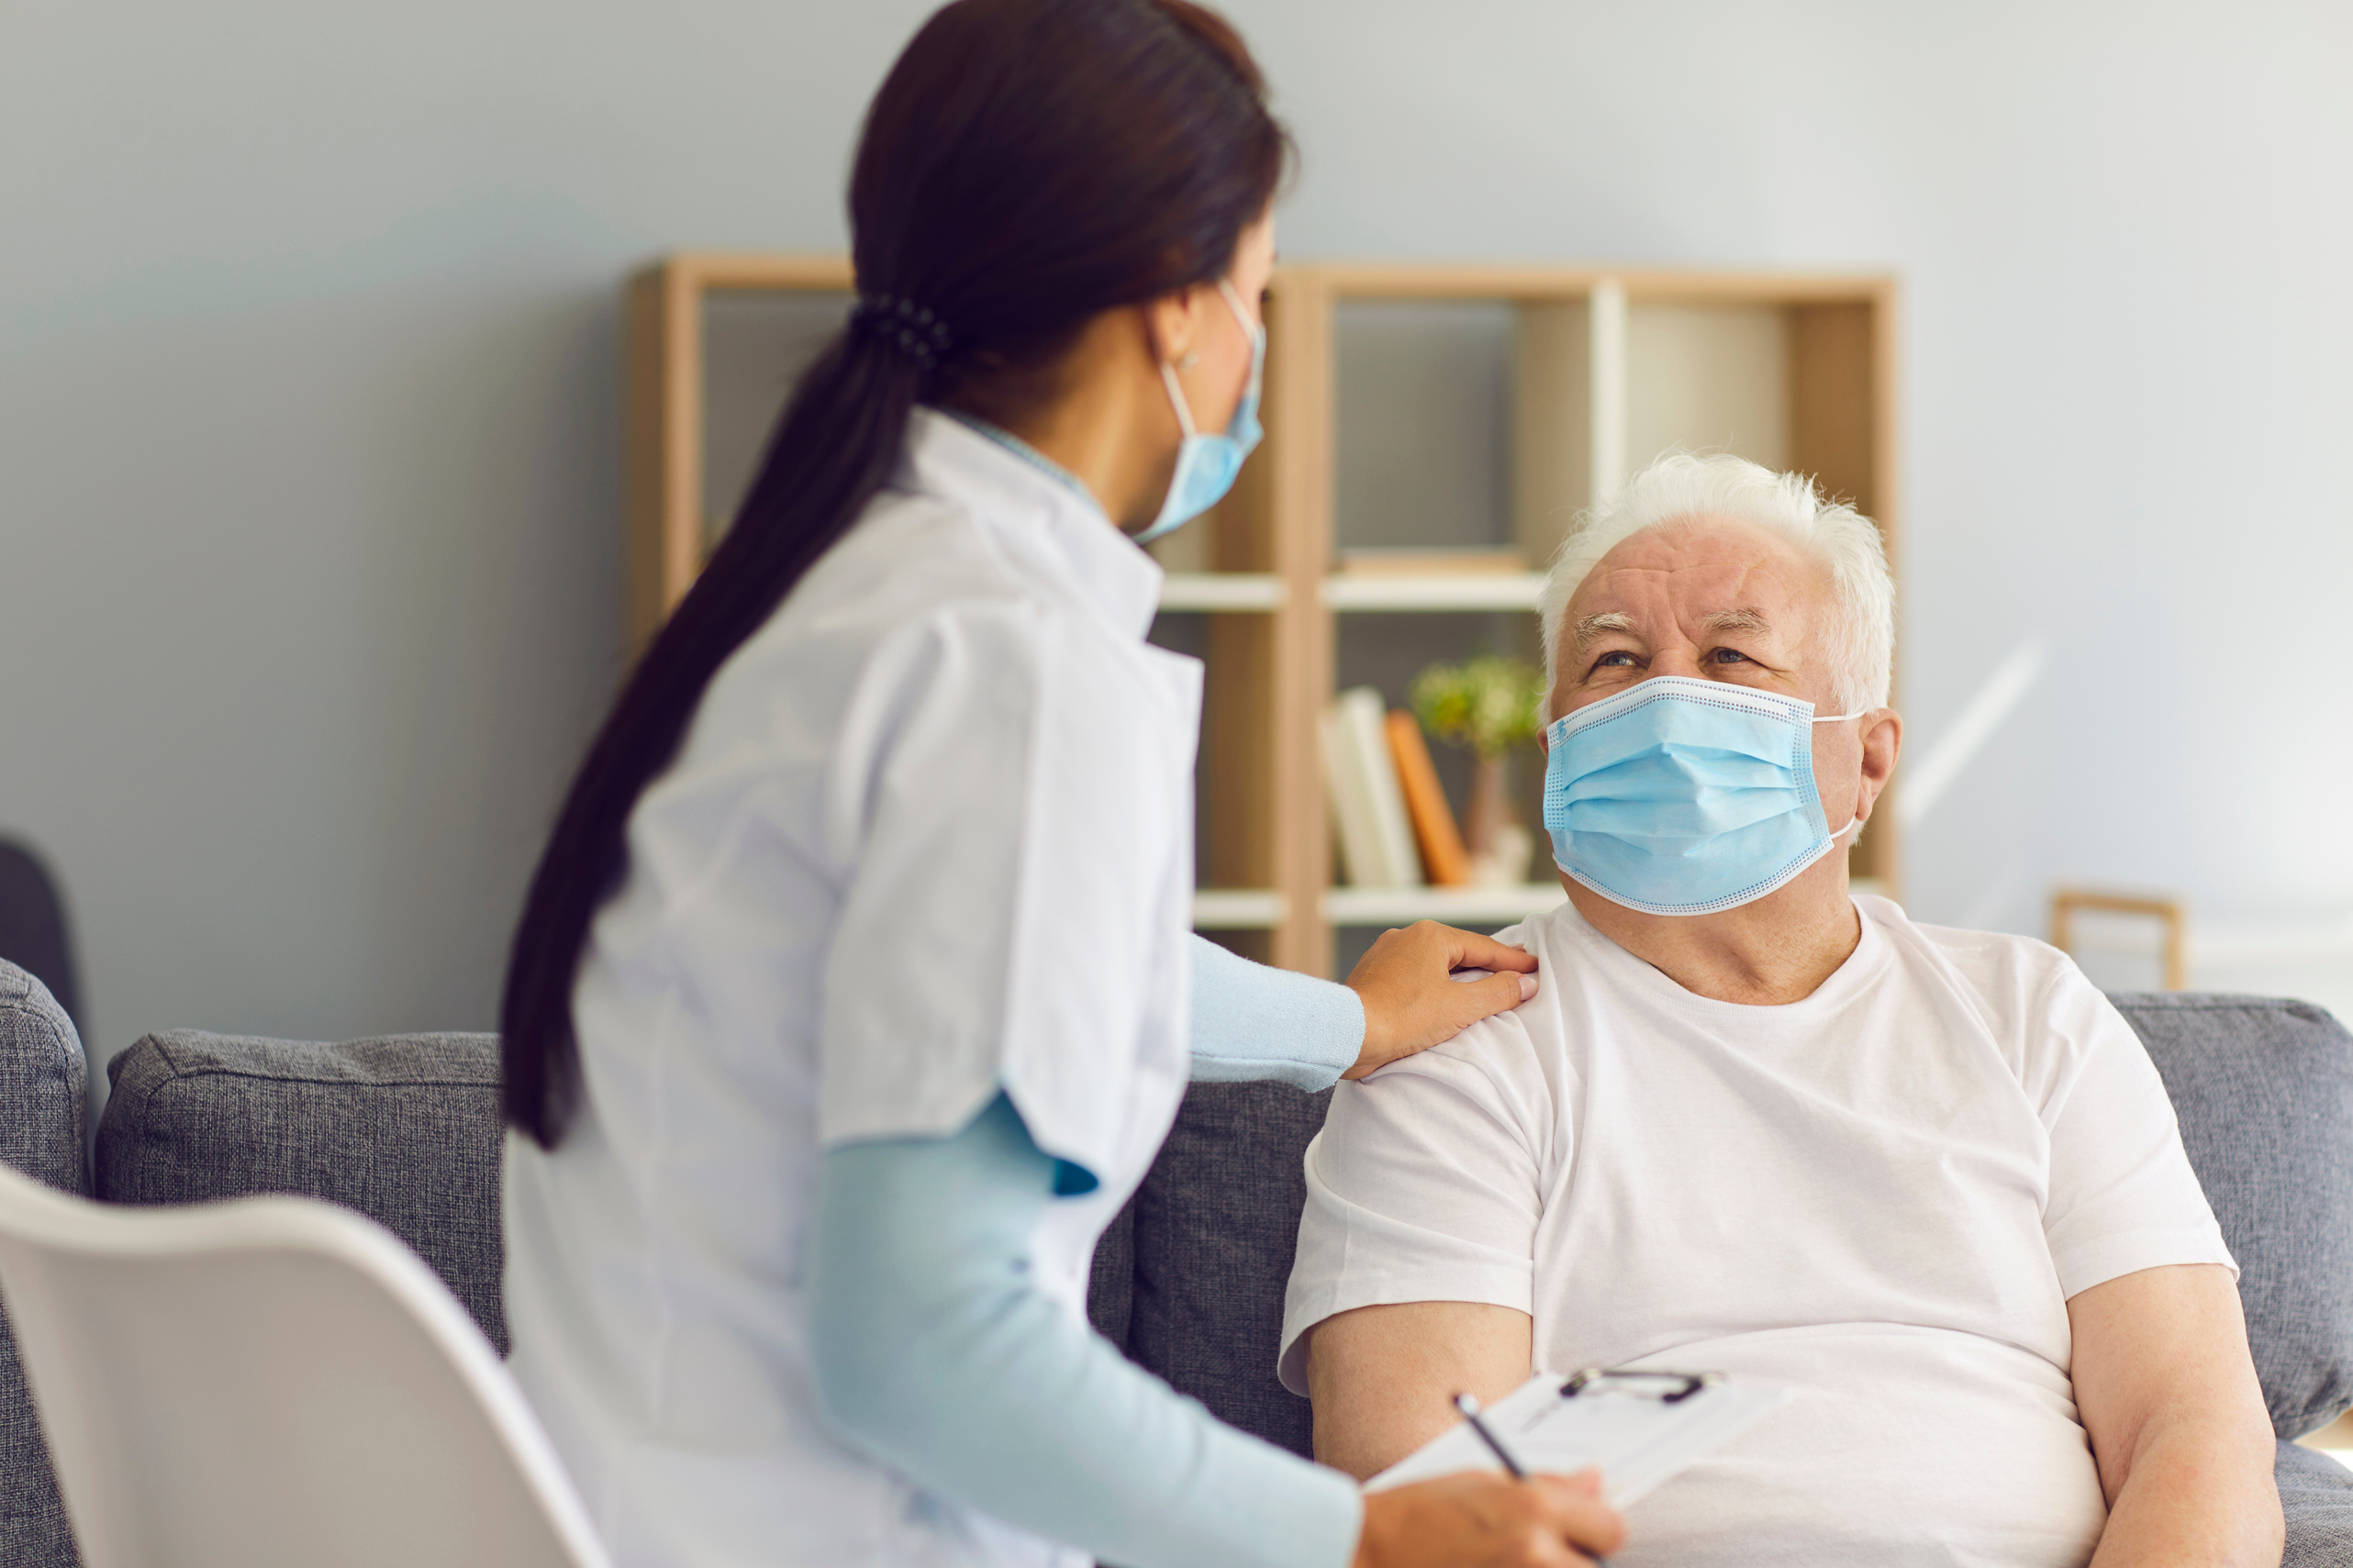 Caring Supportive Doctor Visiting Senior Male Patient at Home during Coronavirus Pandemic